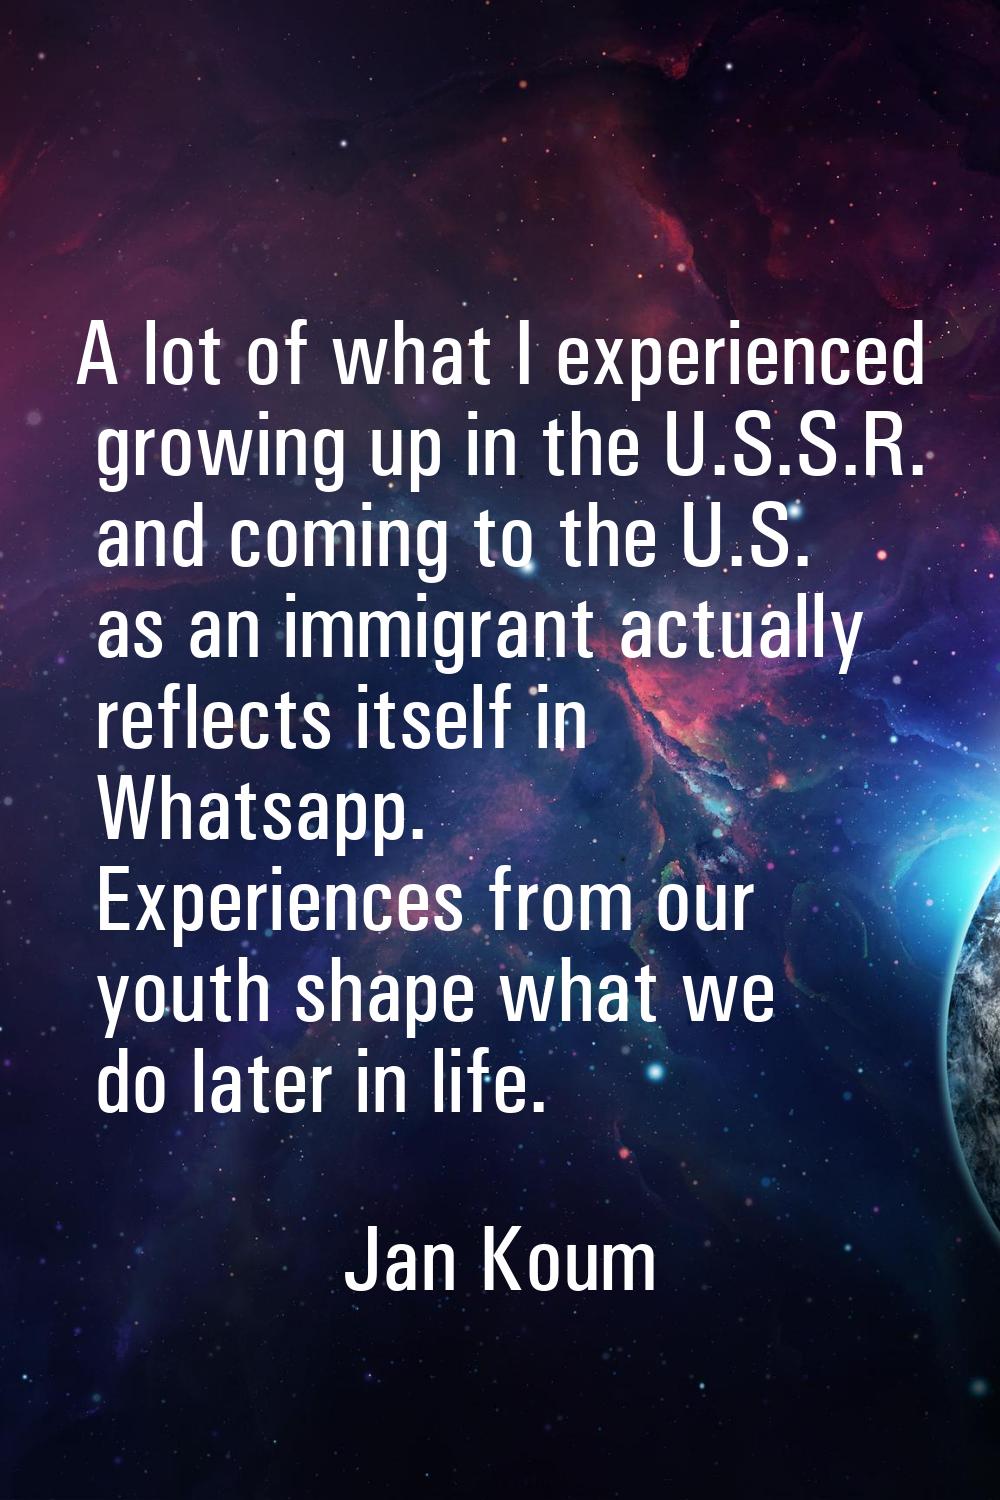 A lot of what I experienced growing up in the U.S.S.R. and coming to the U.S. as an immigrant actua